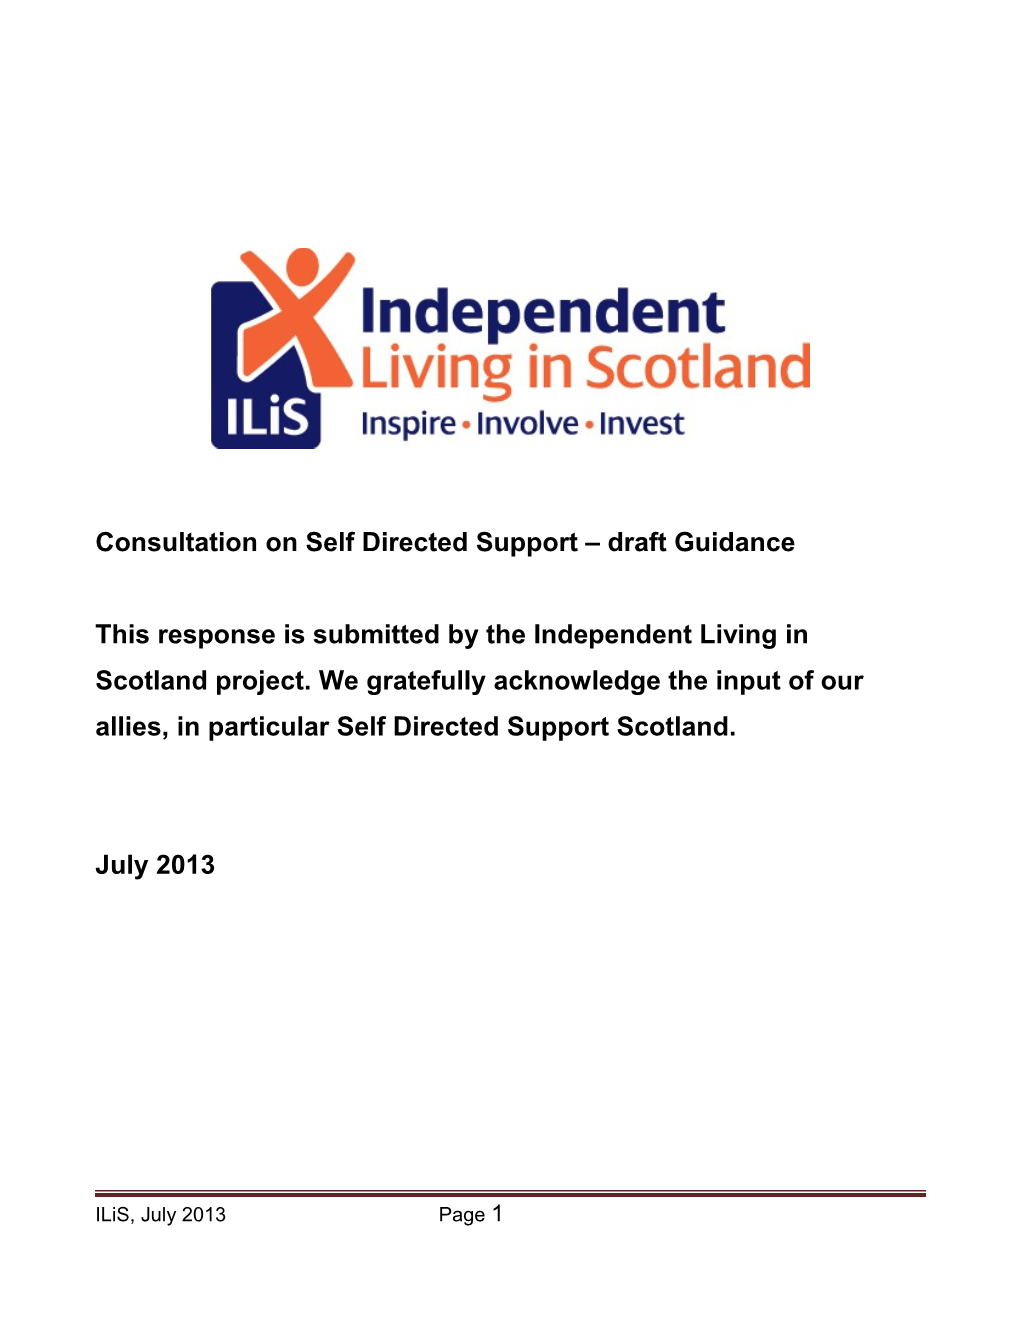 Consultation on Self Directed Support Draft Guidance